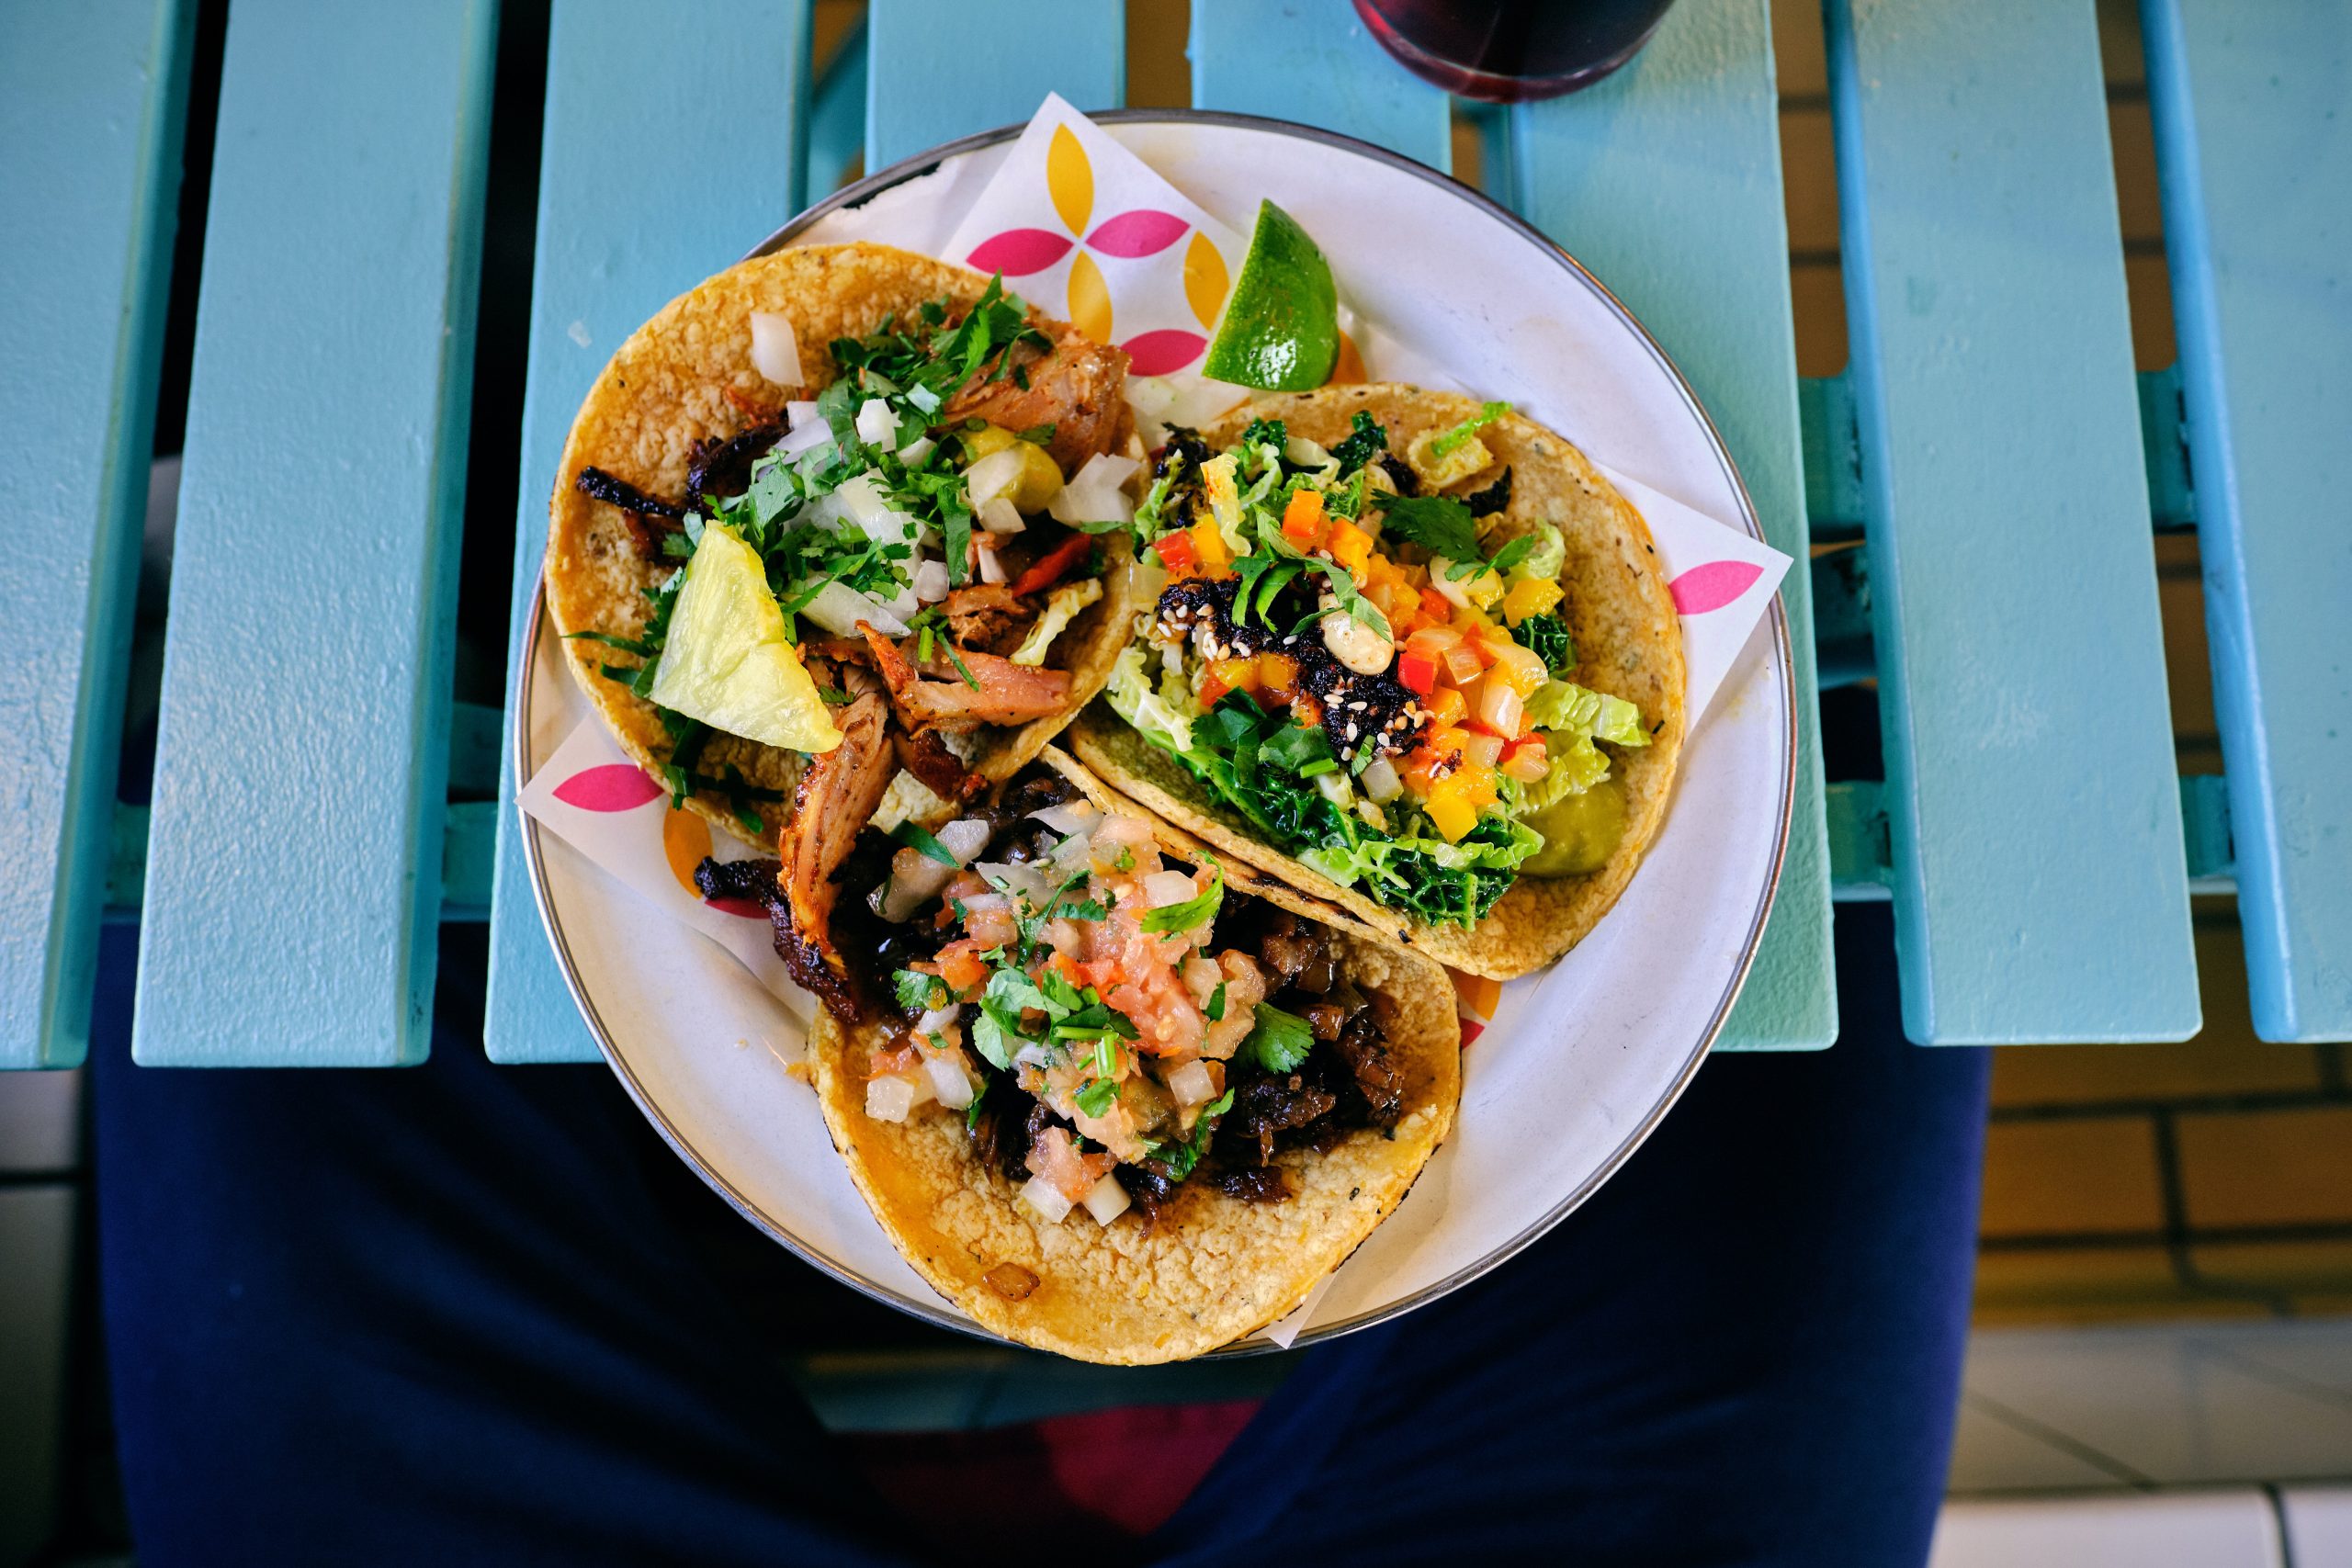 Top 3 iconic taquerías in San Francisco you can’t miss.